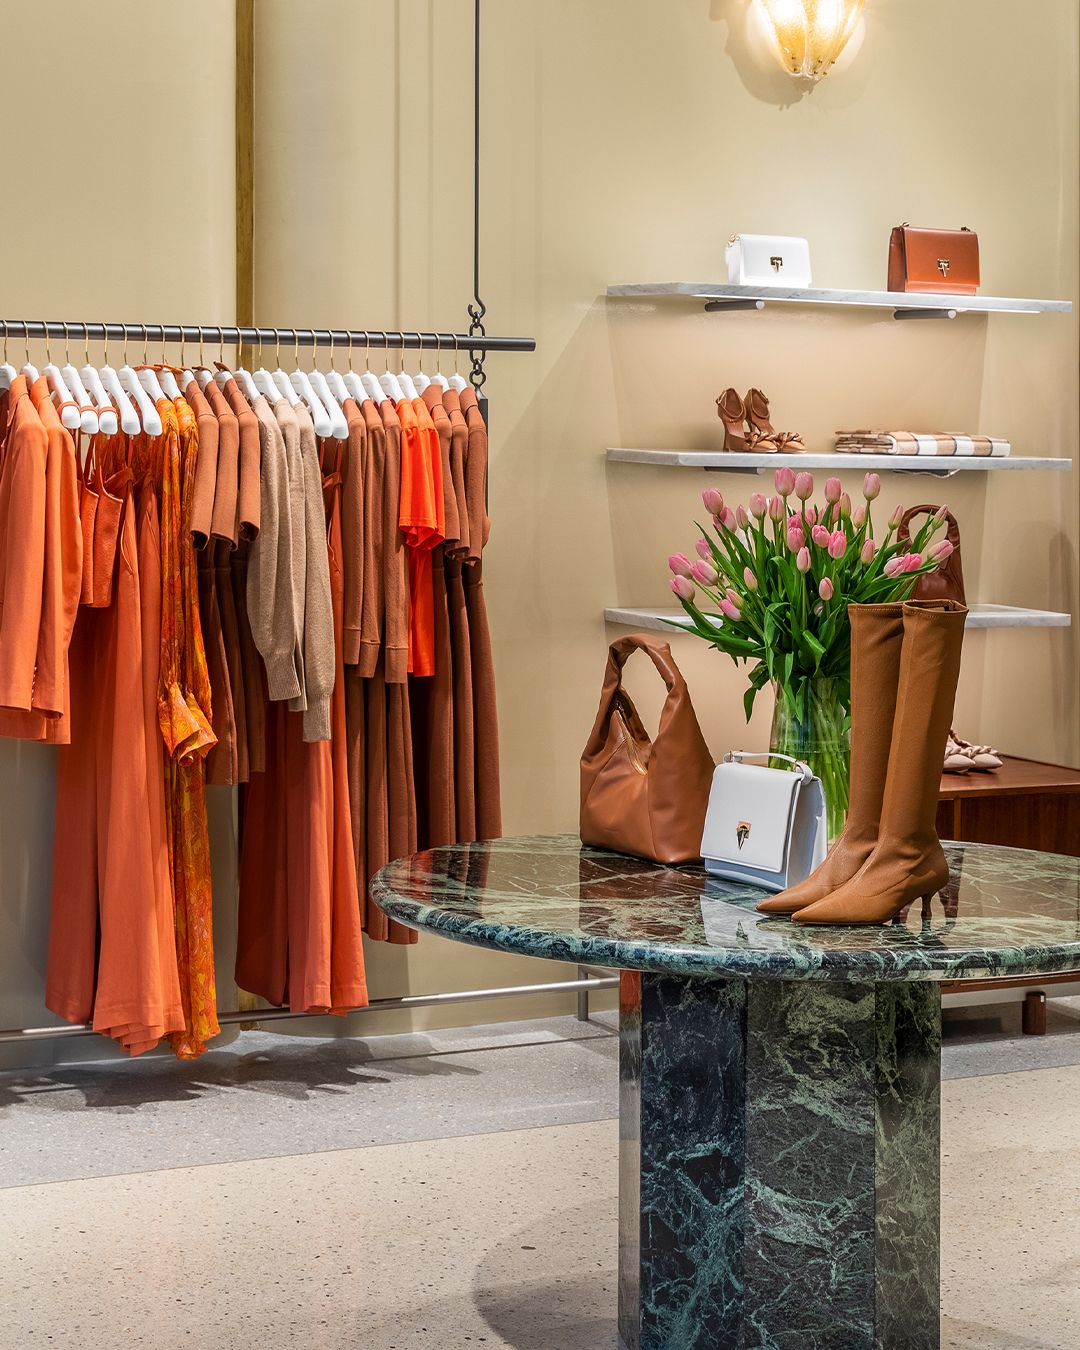 Interior of a women's fashion boutique with orange clothing and tan-coloured accessories